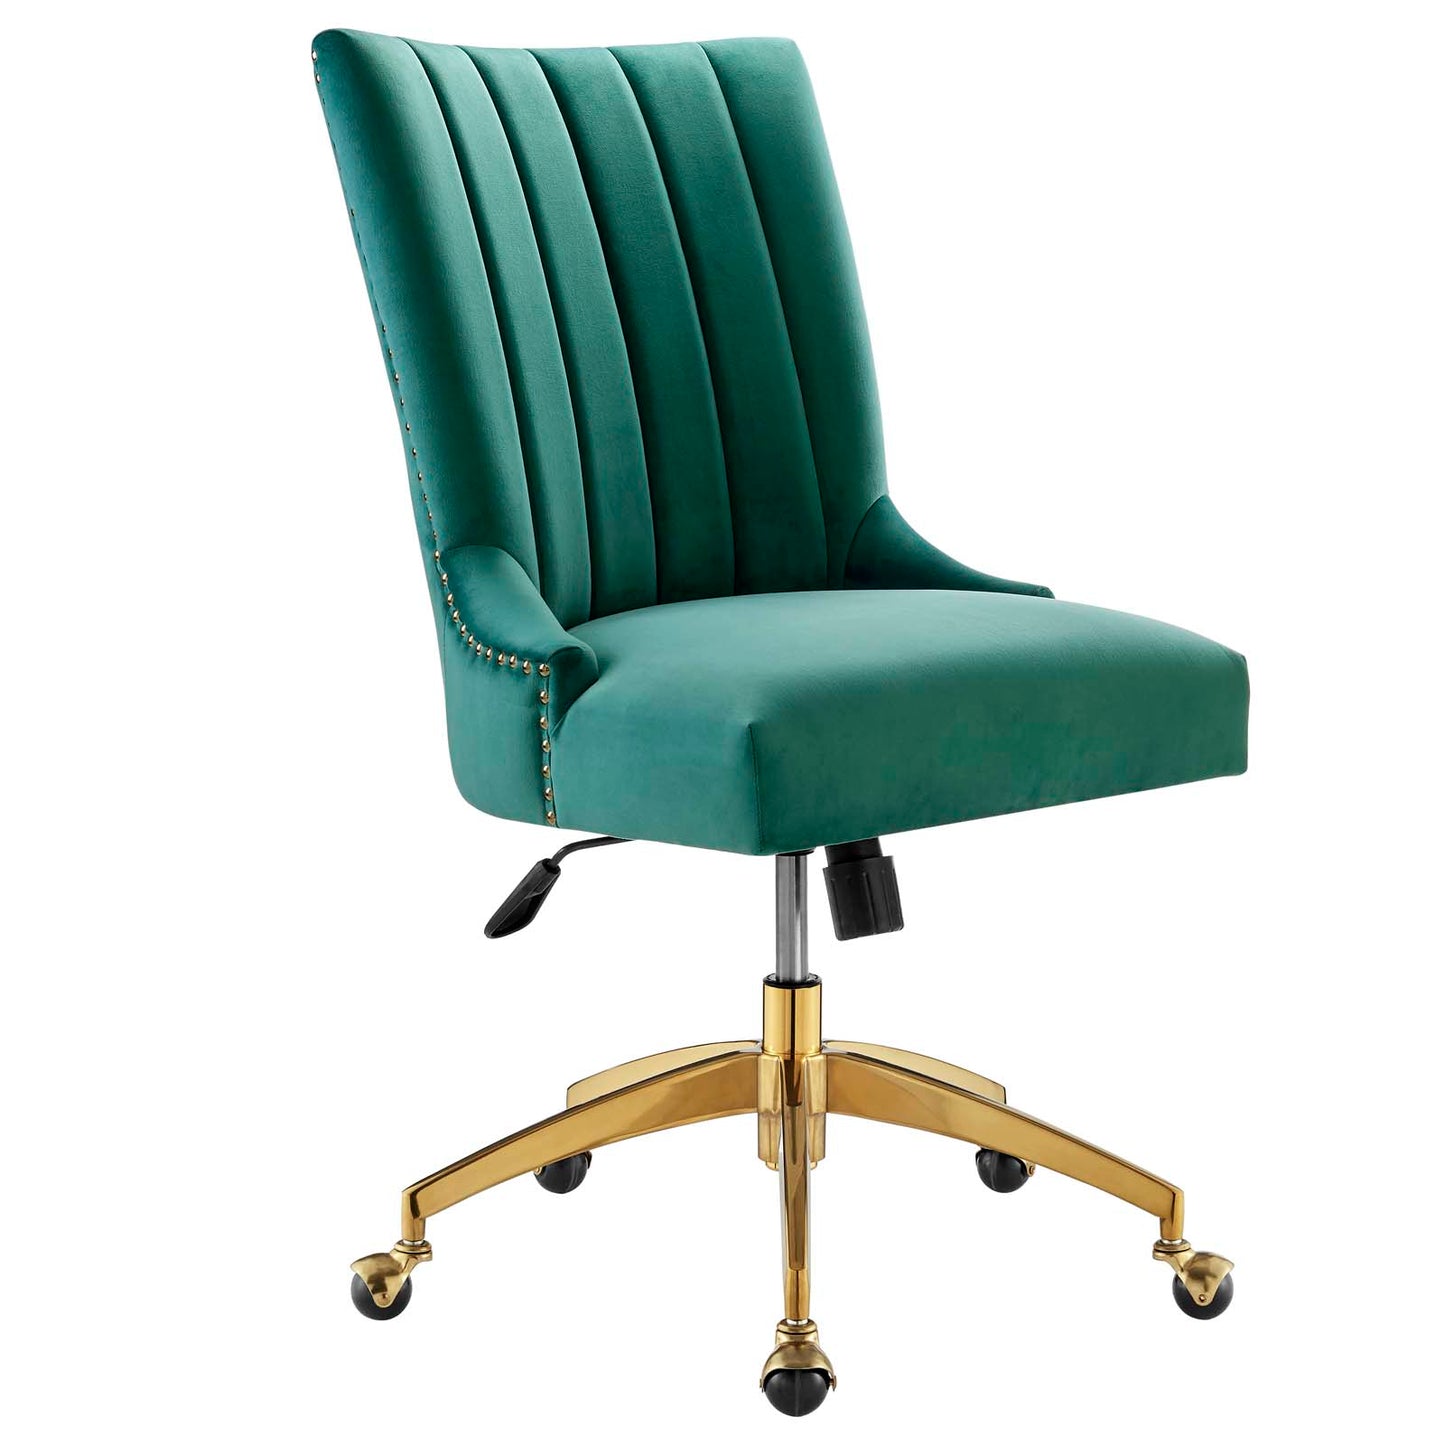 Empower Channel Tufted Performance Velvet Office Chair Gold Teal EEI-4575-GLD-TEA